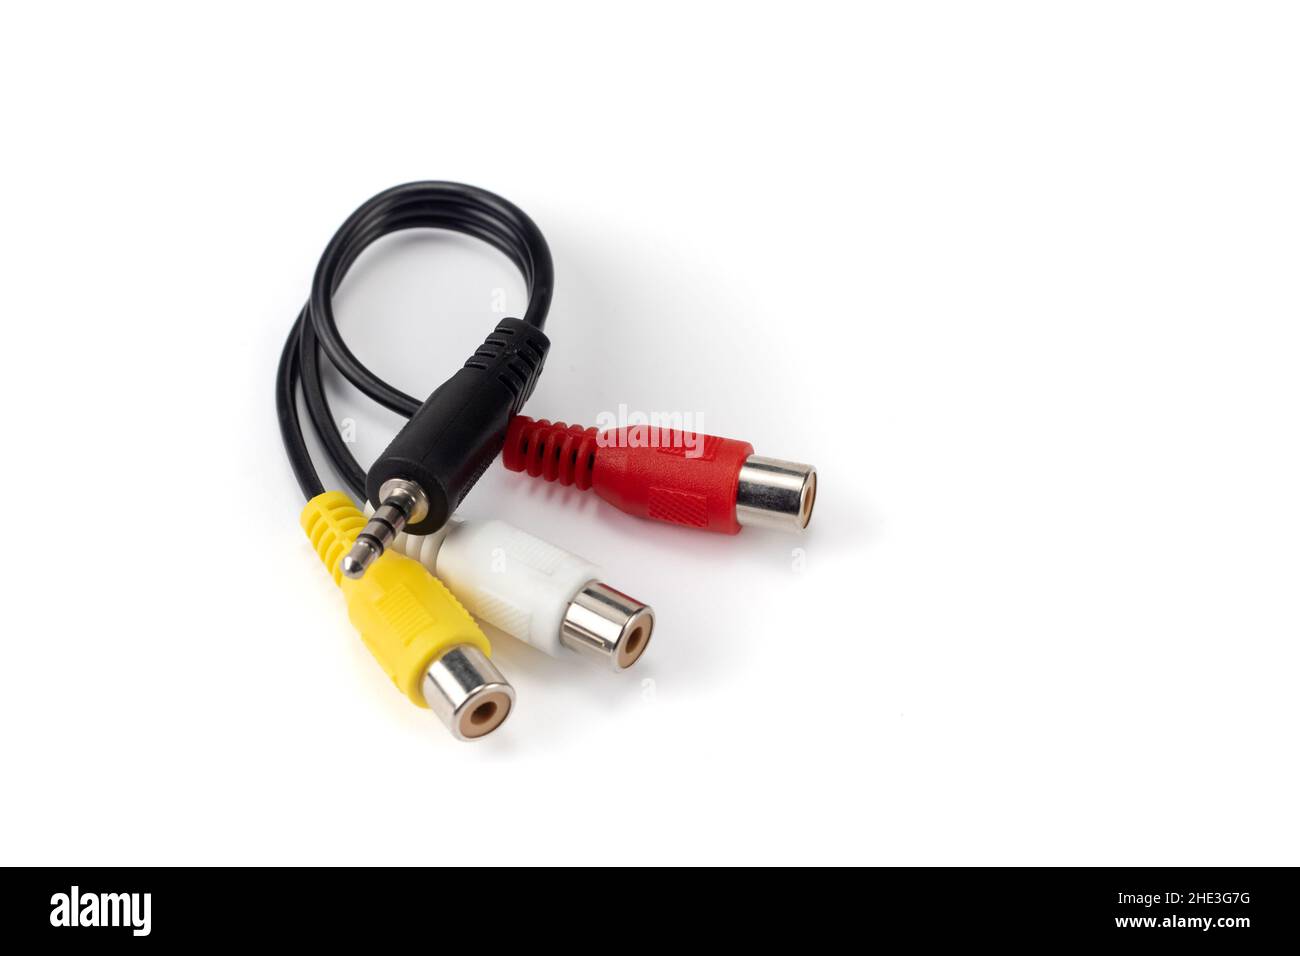 RCA Jack Adapter with Cable Stock Photo - Image of theater, color: 112285774